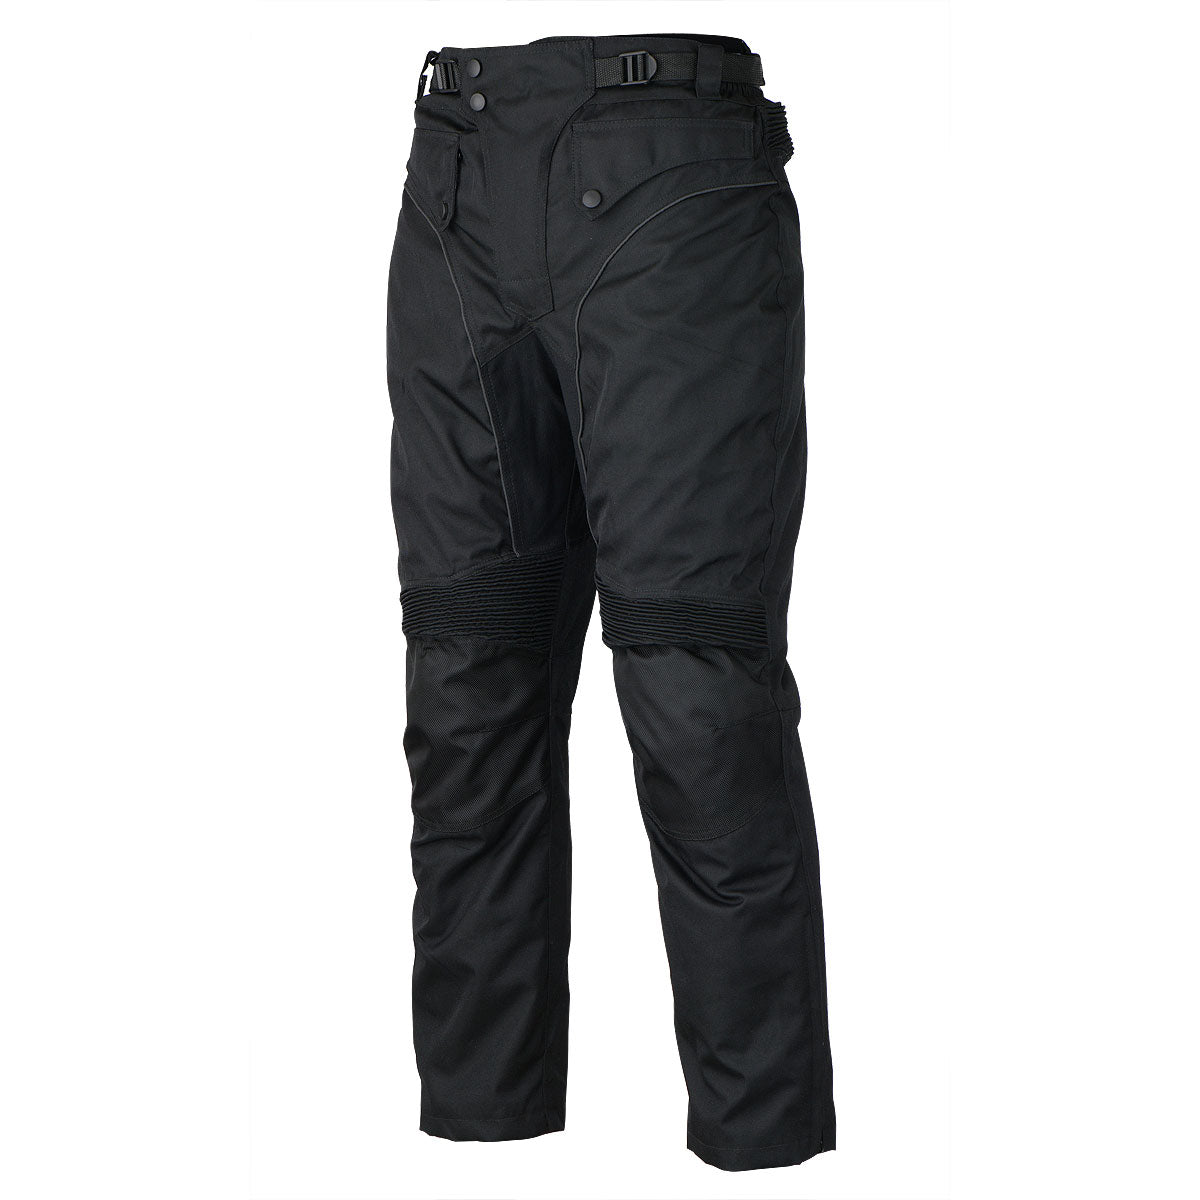 The Best Motorcycle Pants You Can Buy [Updated Q1 2021]